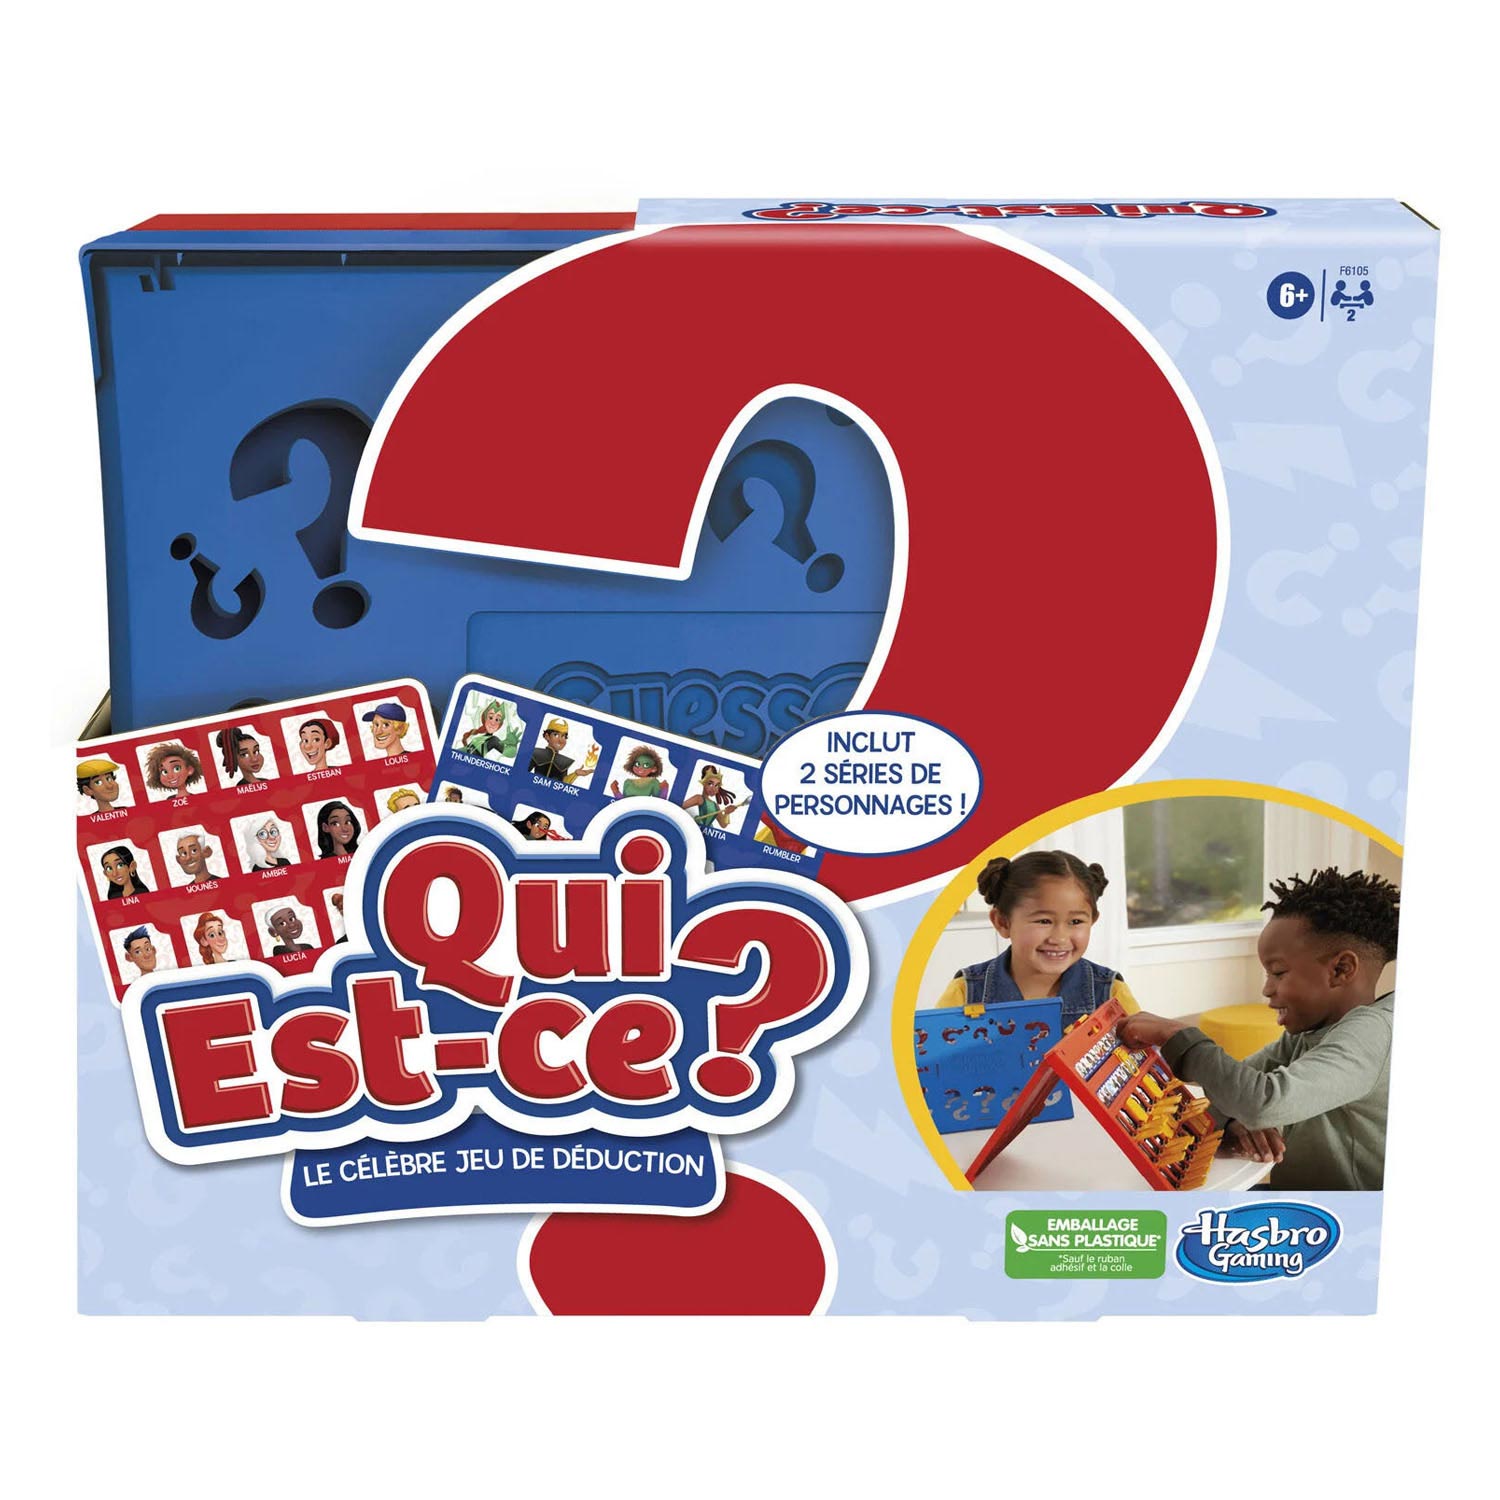 Qui est-ce ?, Guessing game in French